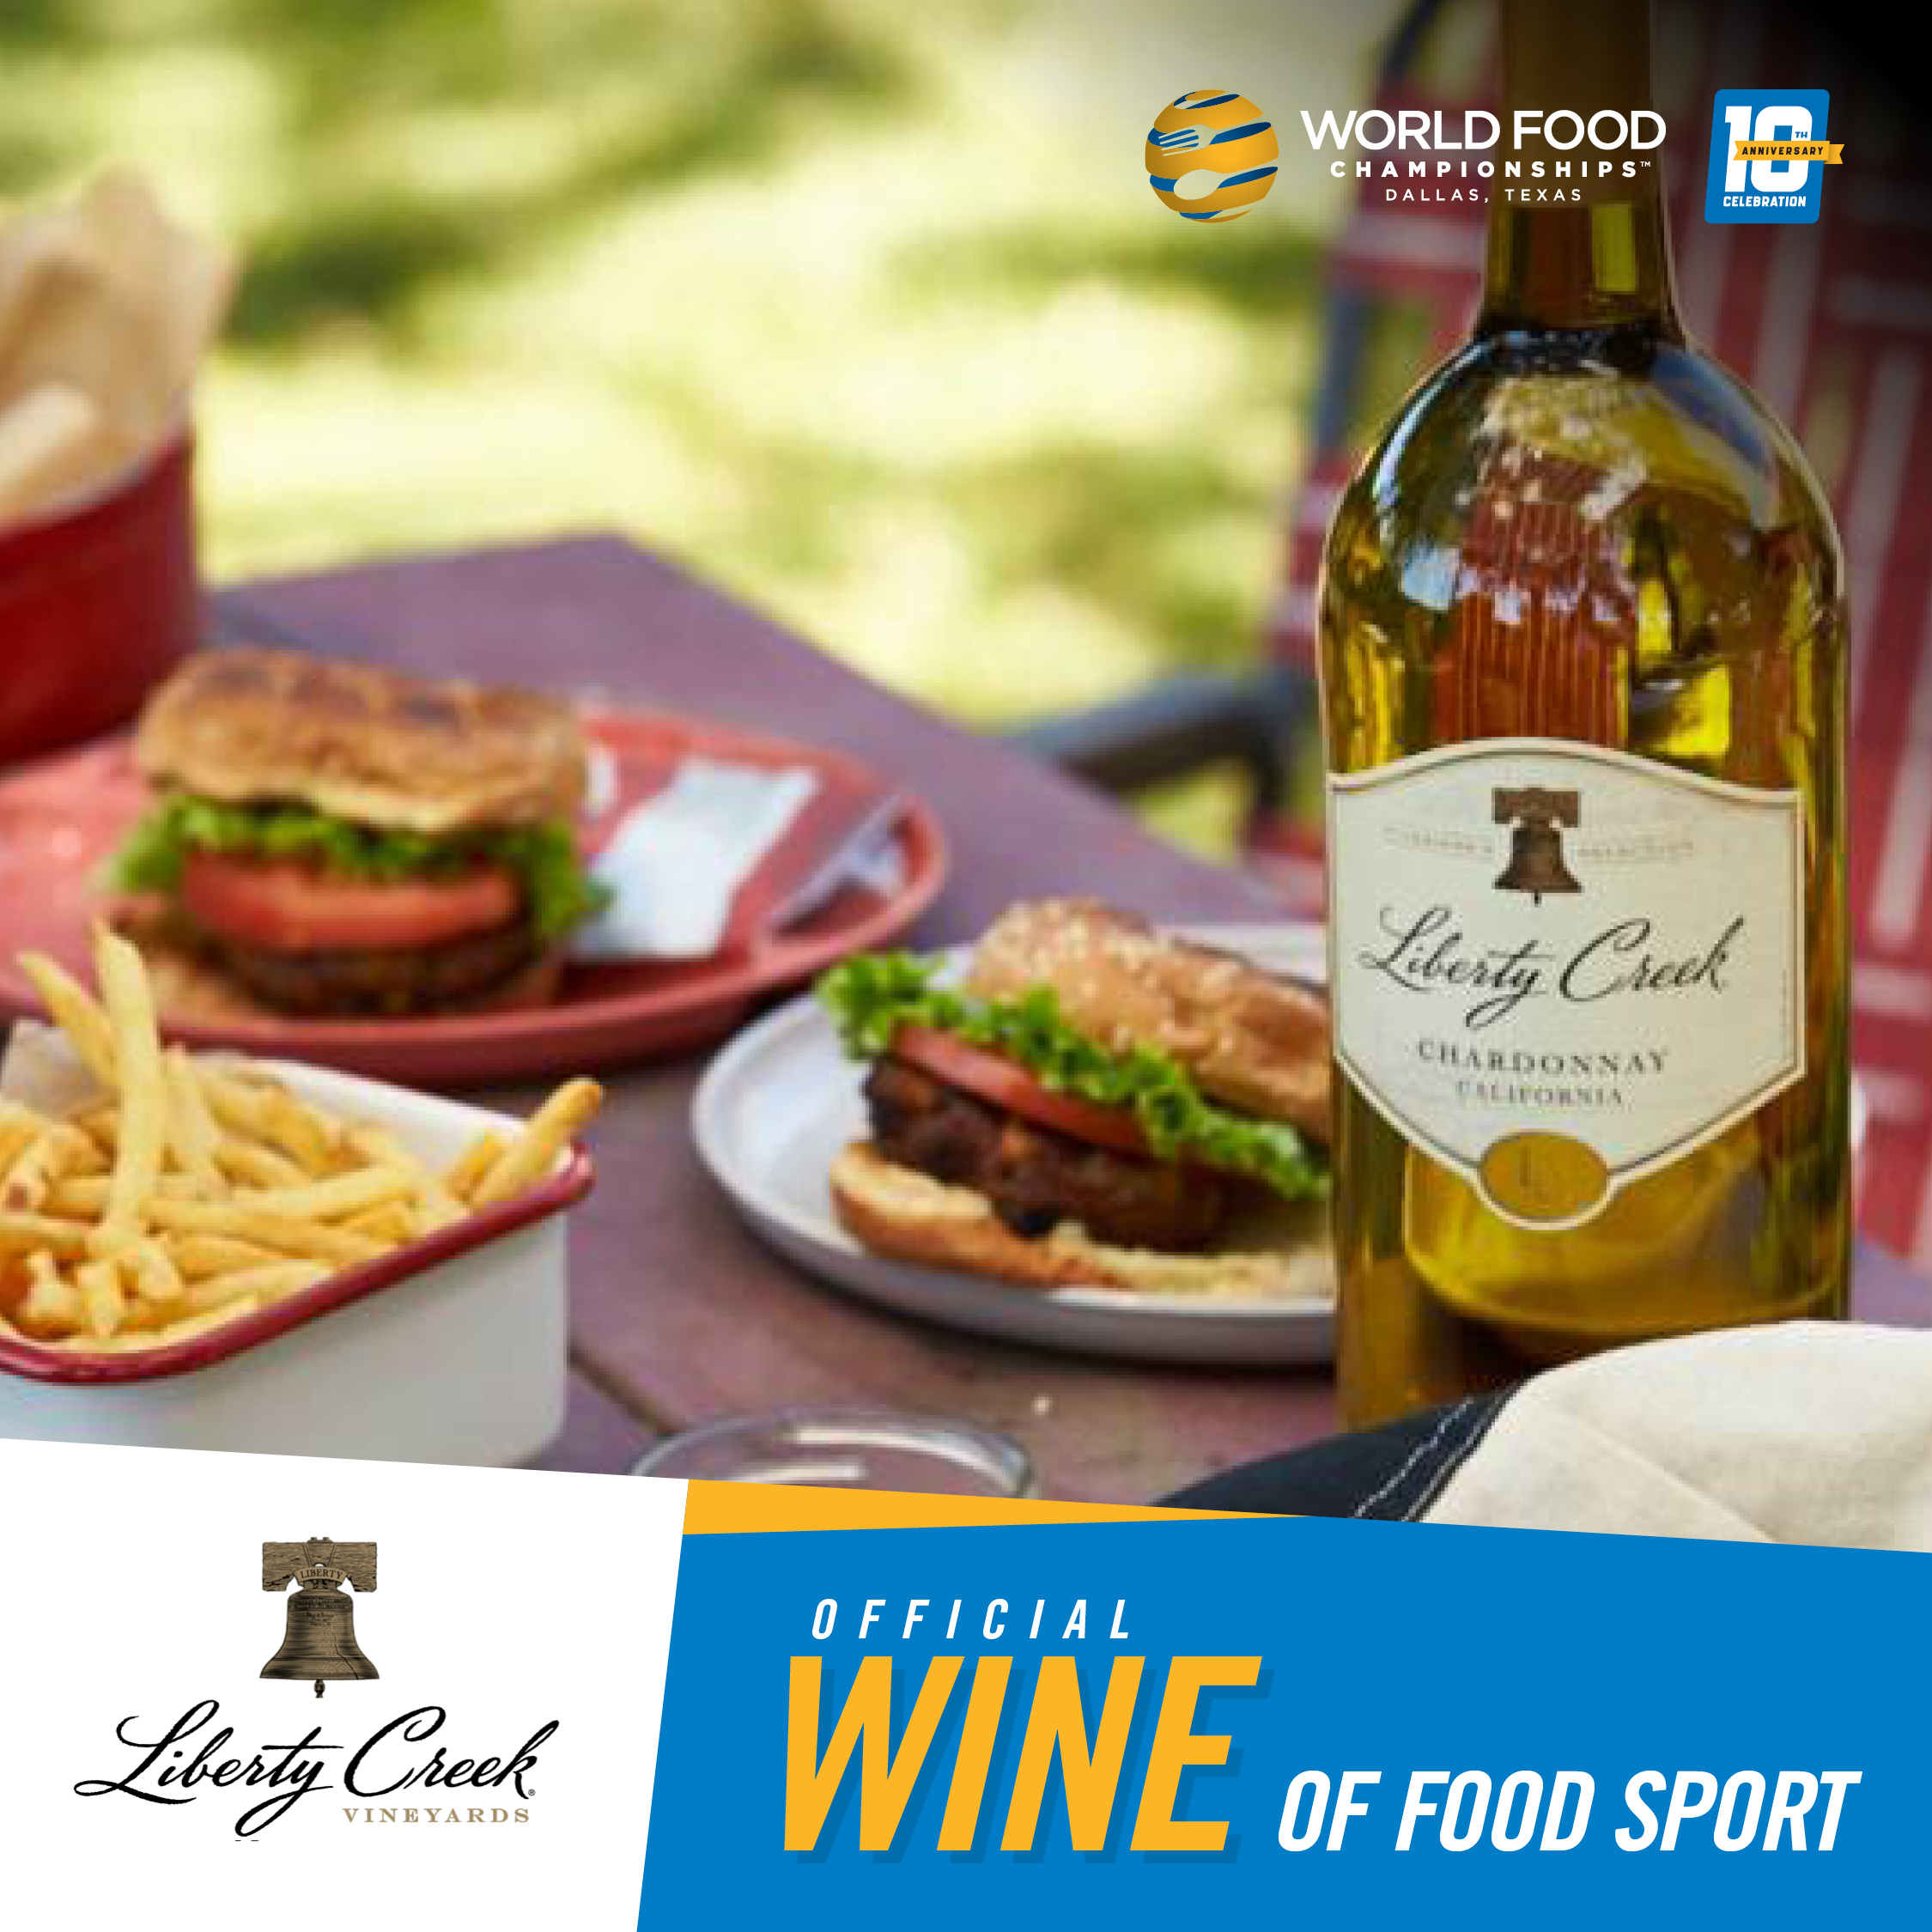 World Food Championships Announces Official Wine Partner